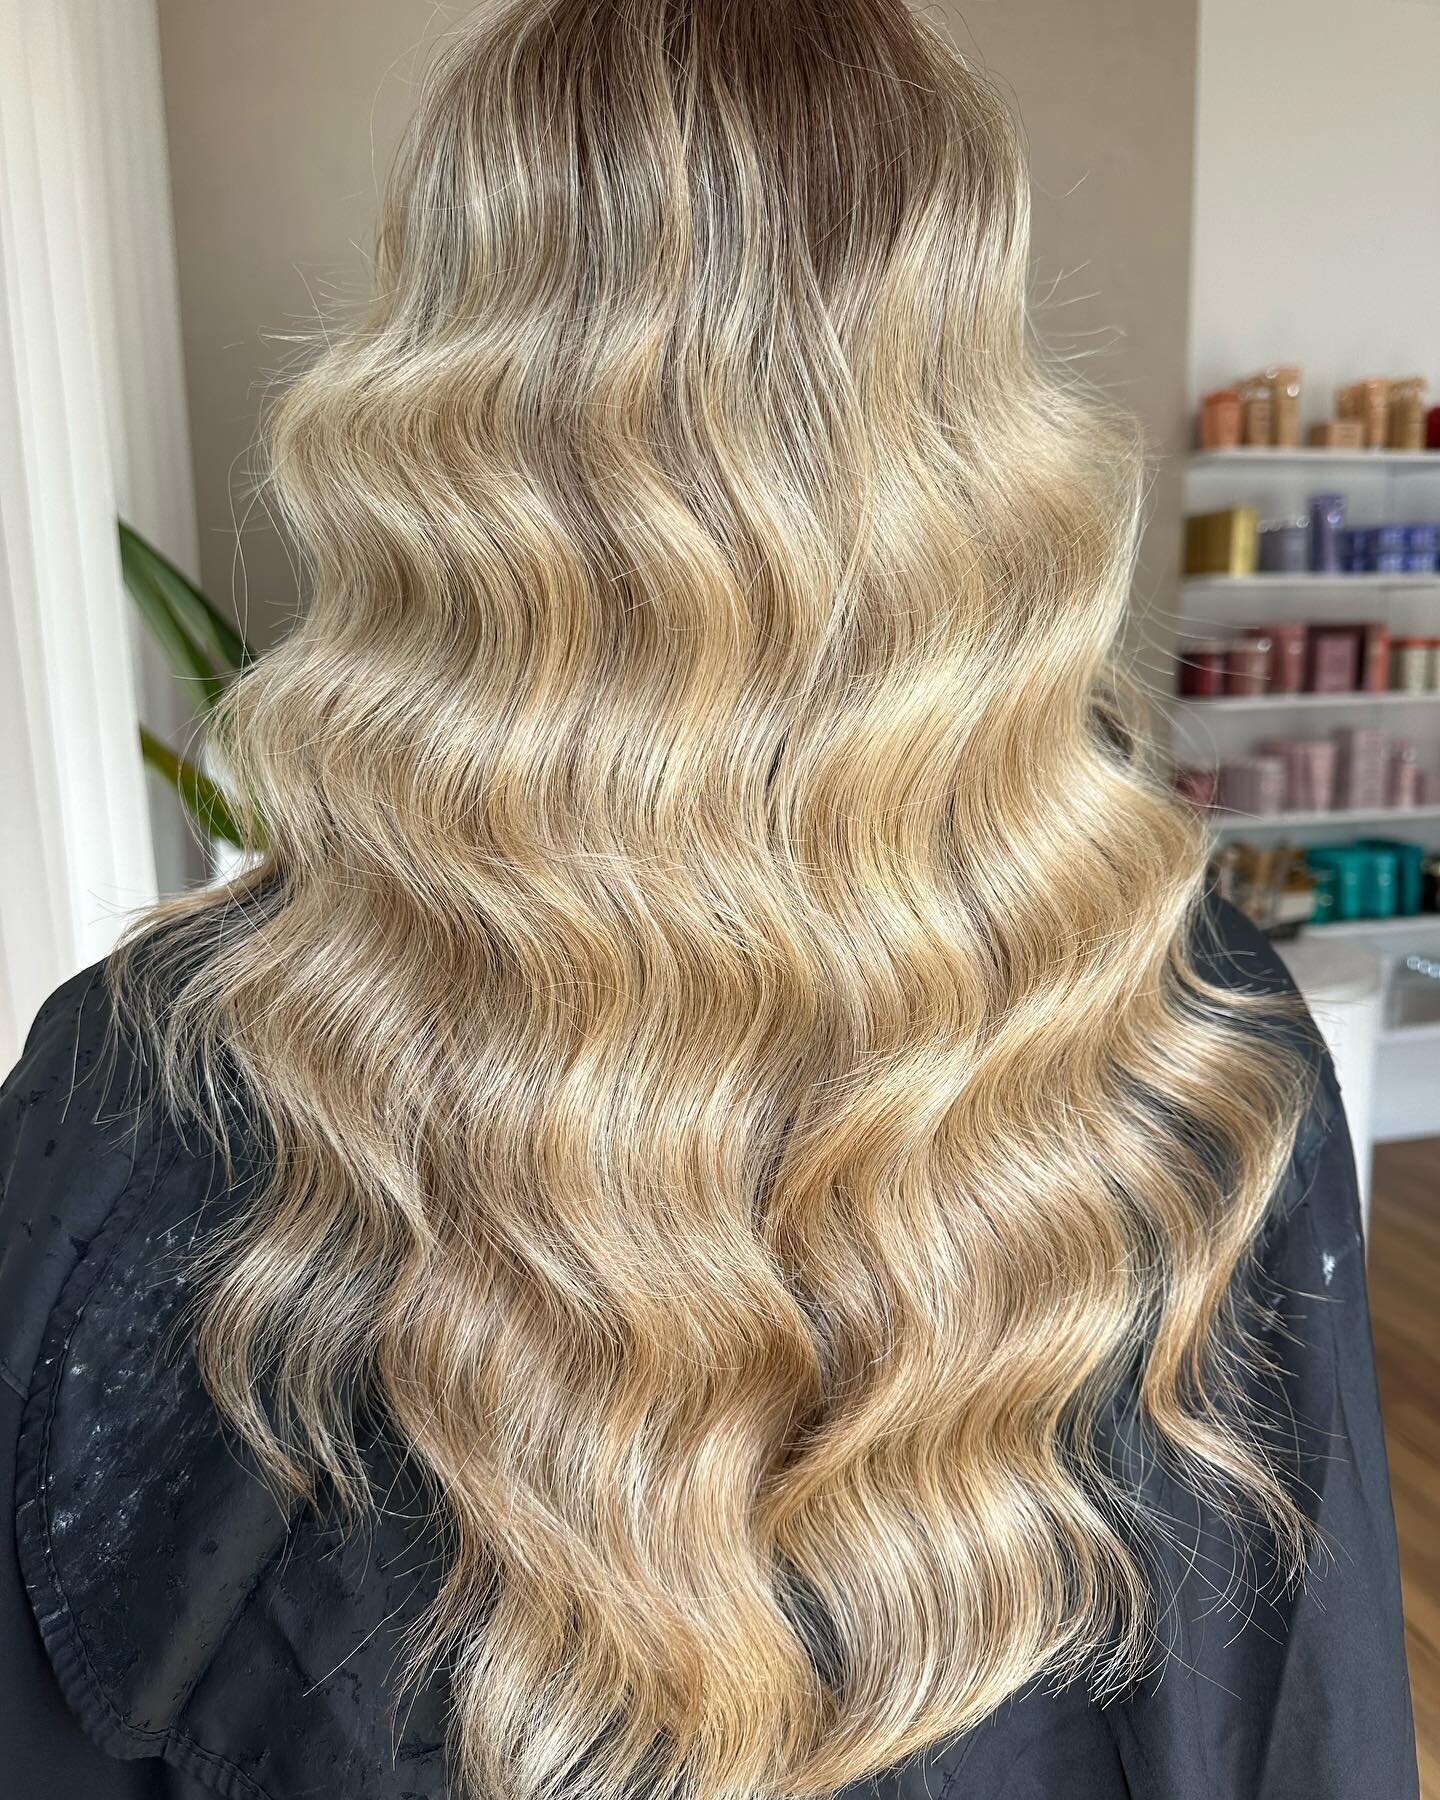 𝙈𝙖𝙠𝙚 𝙒𝙖𝙫𝙚𝙨 🌊🐚 
Stylist ~ Courtney

Have you seen our latest 𝗴𝗶𝘃𝗲𝗮𝘄𝗮𝘆? 
There are still a few days left to be in the draw! Check out our pinned post for details ✨ 

🤍

With the ghd Wave Wand, you can achieve effortless, tousled wav